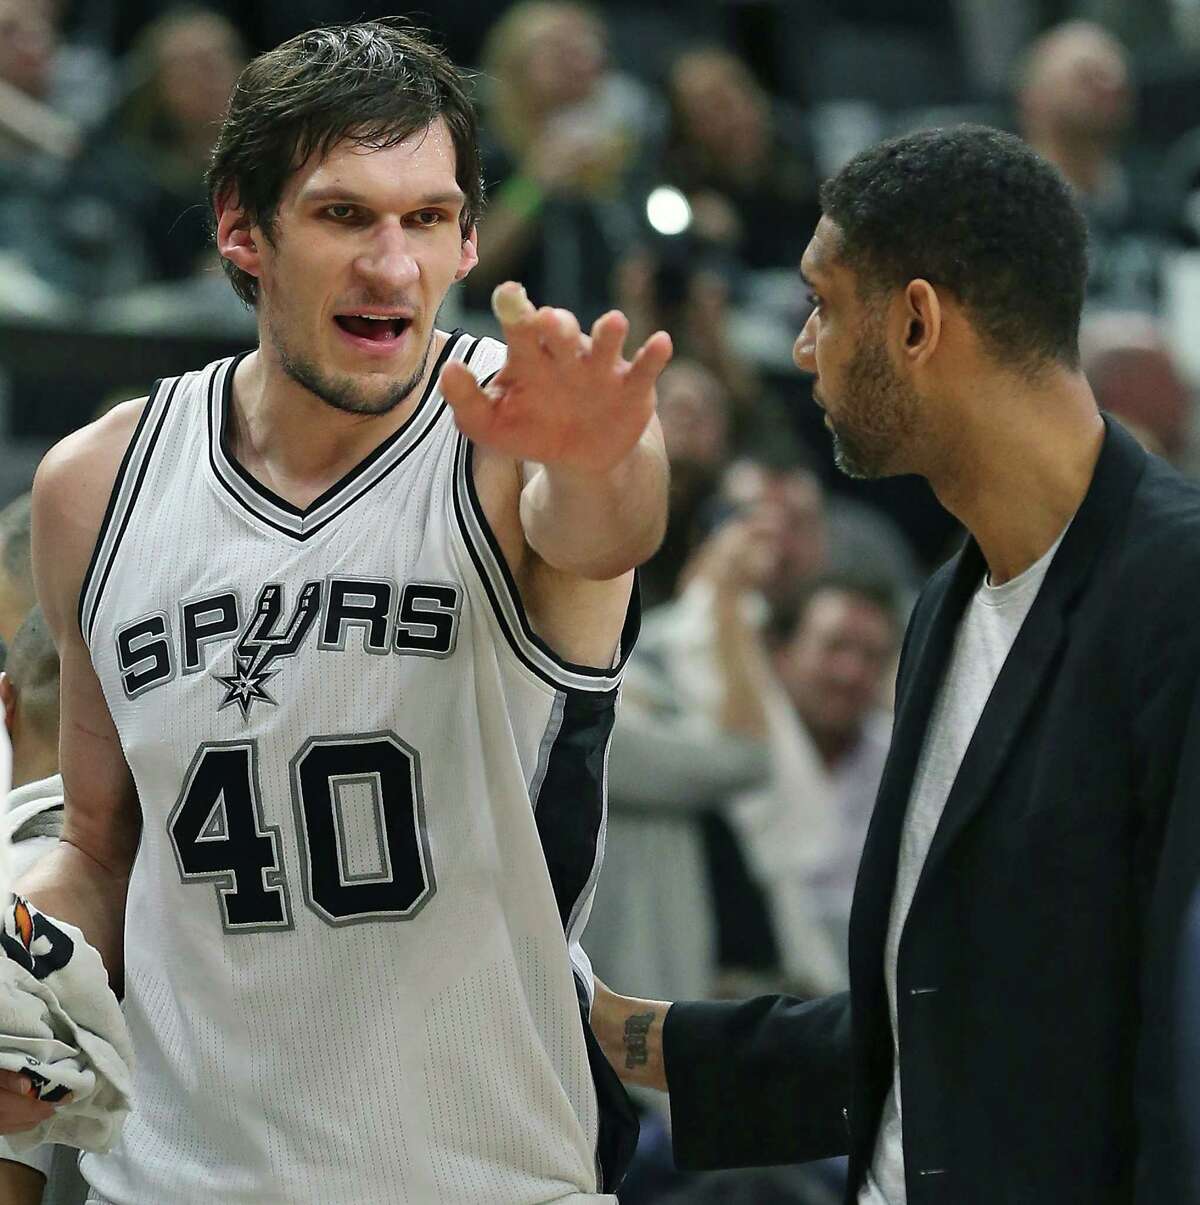 Boban Majanovic has a discussion about play with Tim Duncan on the bench as the Spurs host the Suns at the AT&T Center on December 30, 2015.